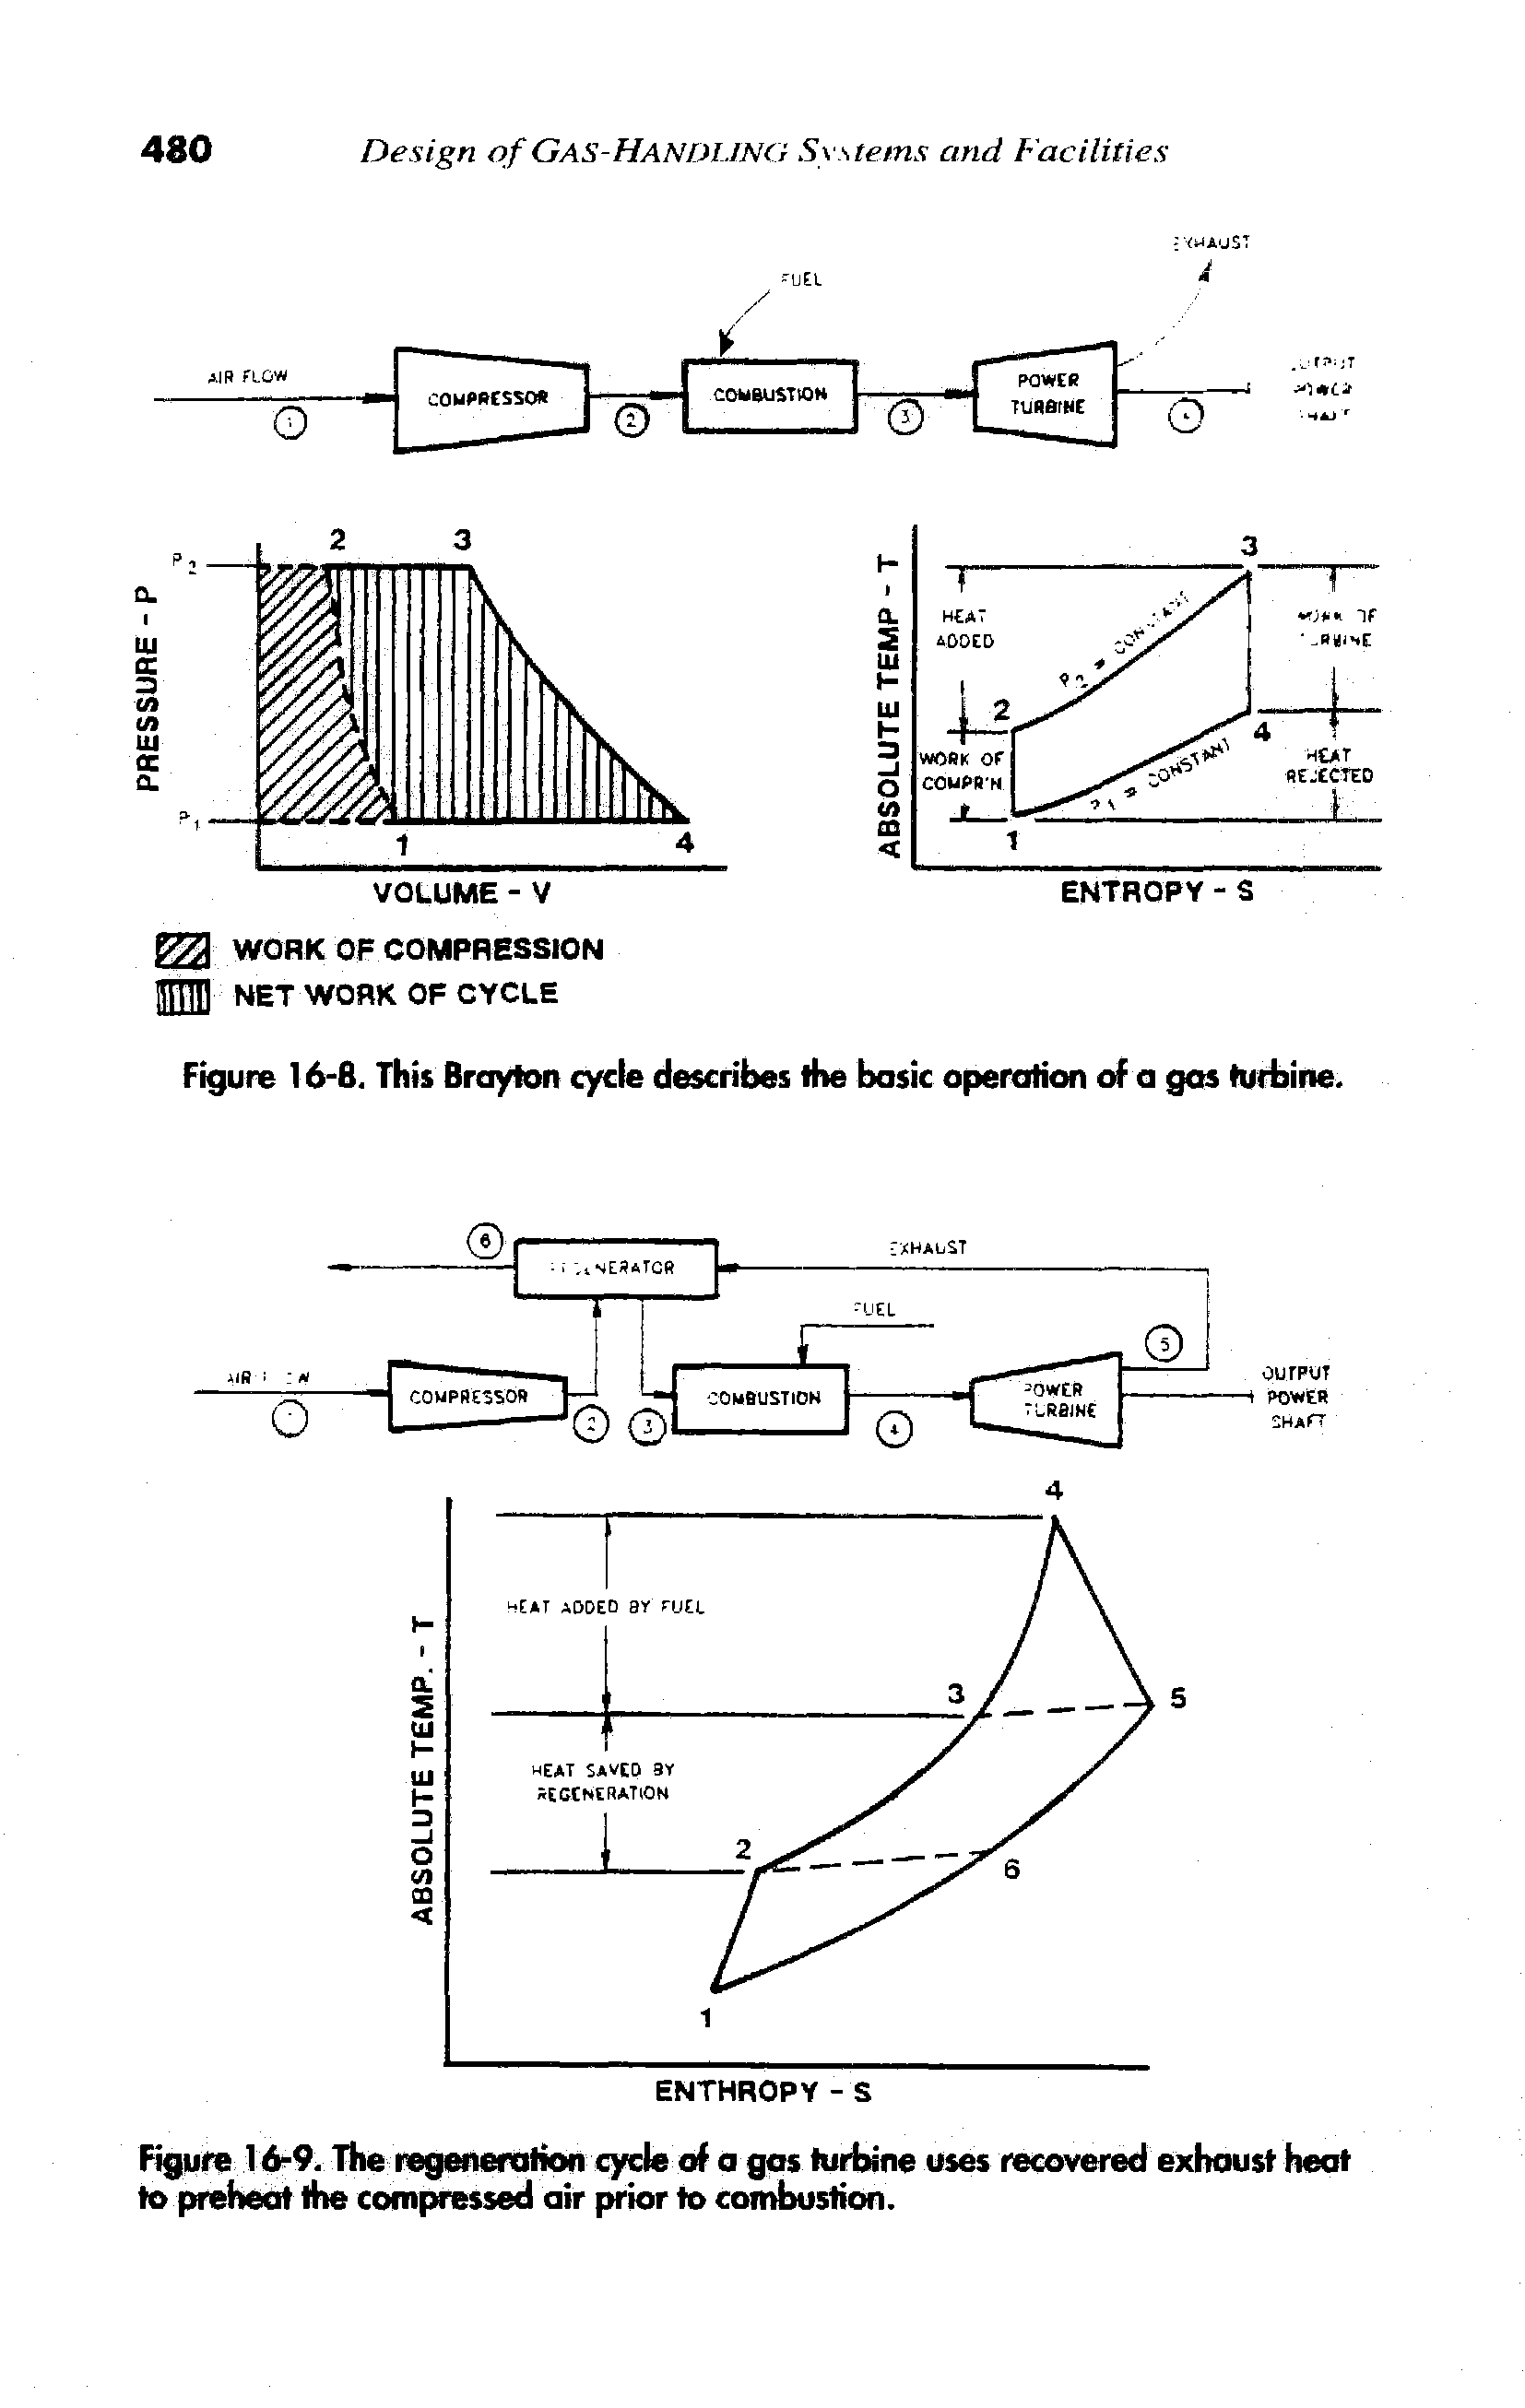 Figure 16-8. This Brayton cycle describes the basic operation of a gas turbine.